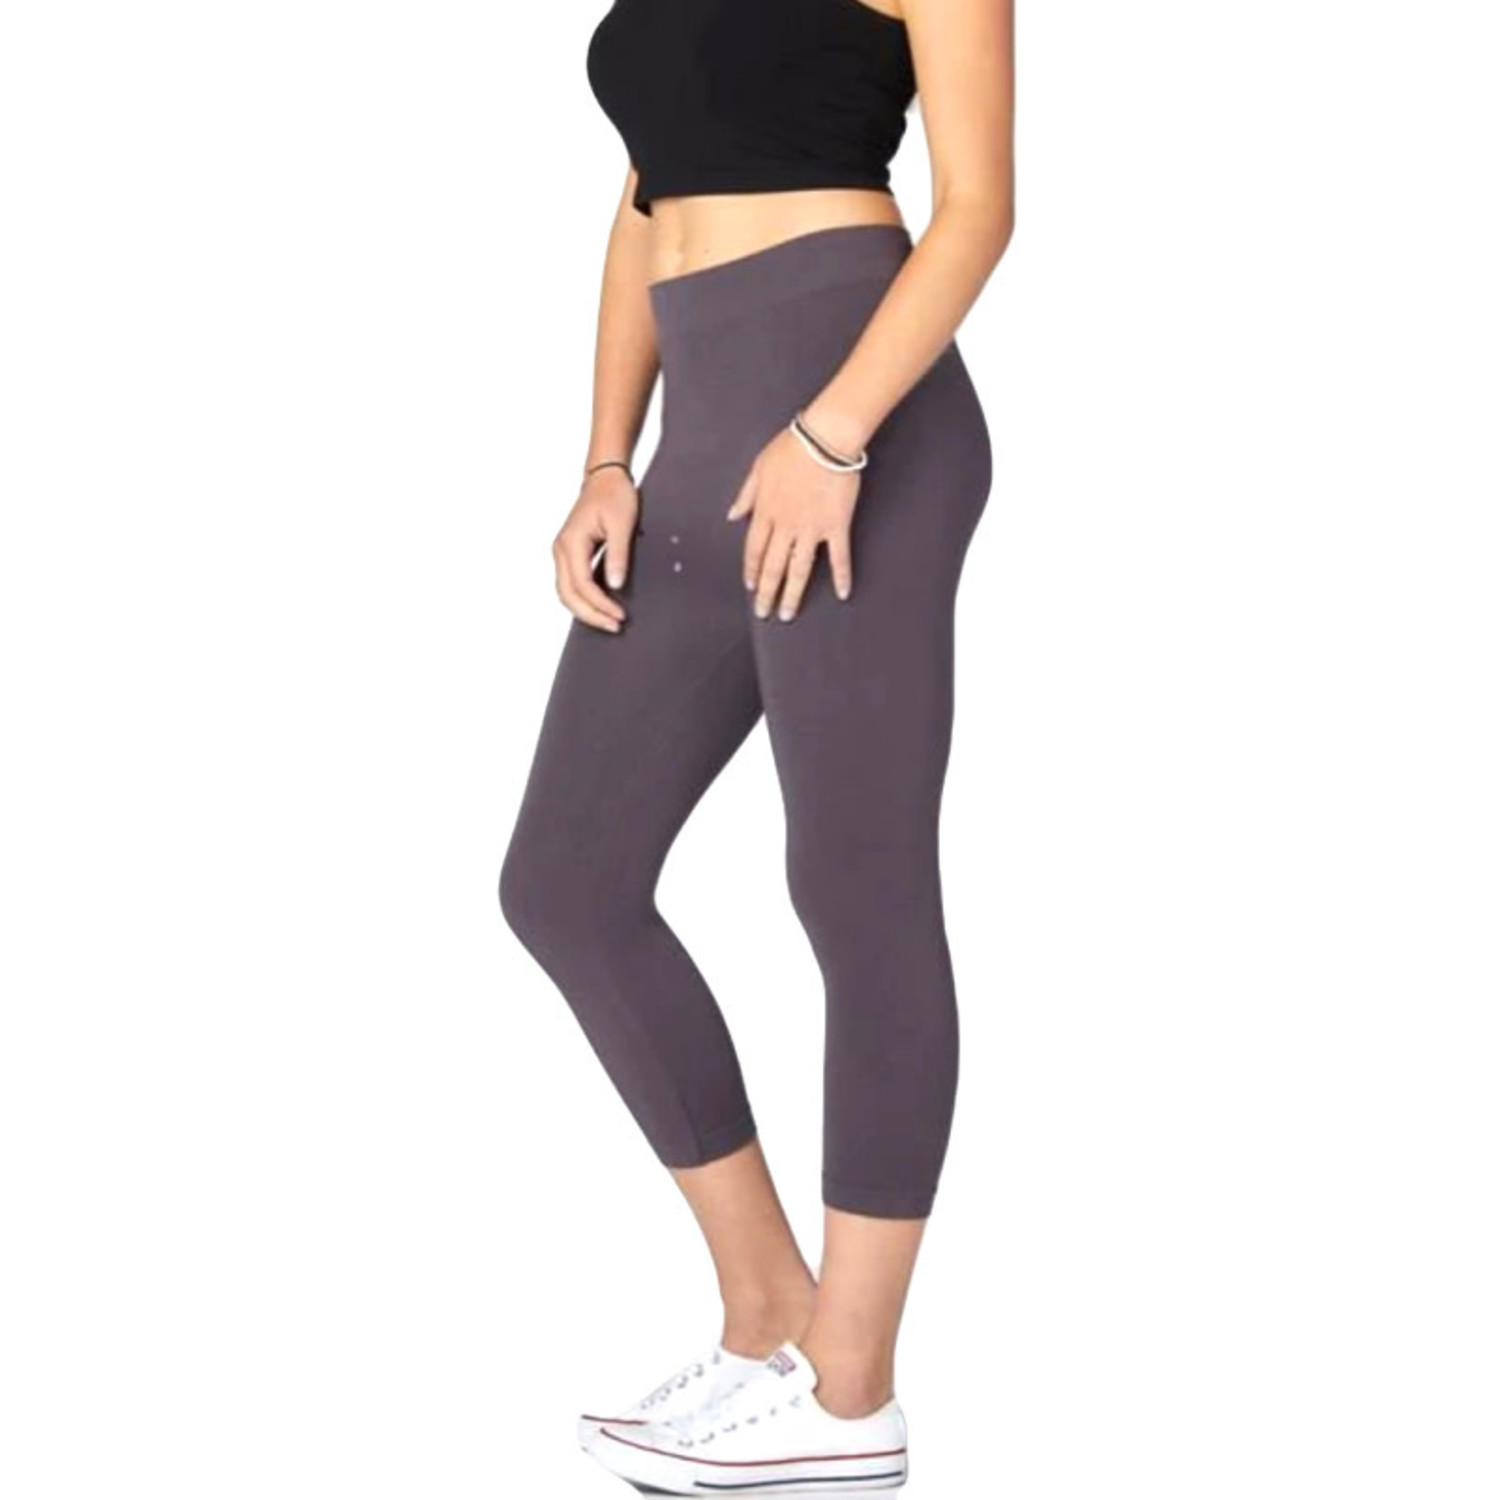 Chickfly Bamboo Leggings High Rise or Low Rise